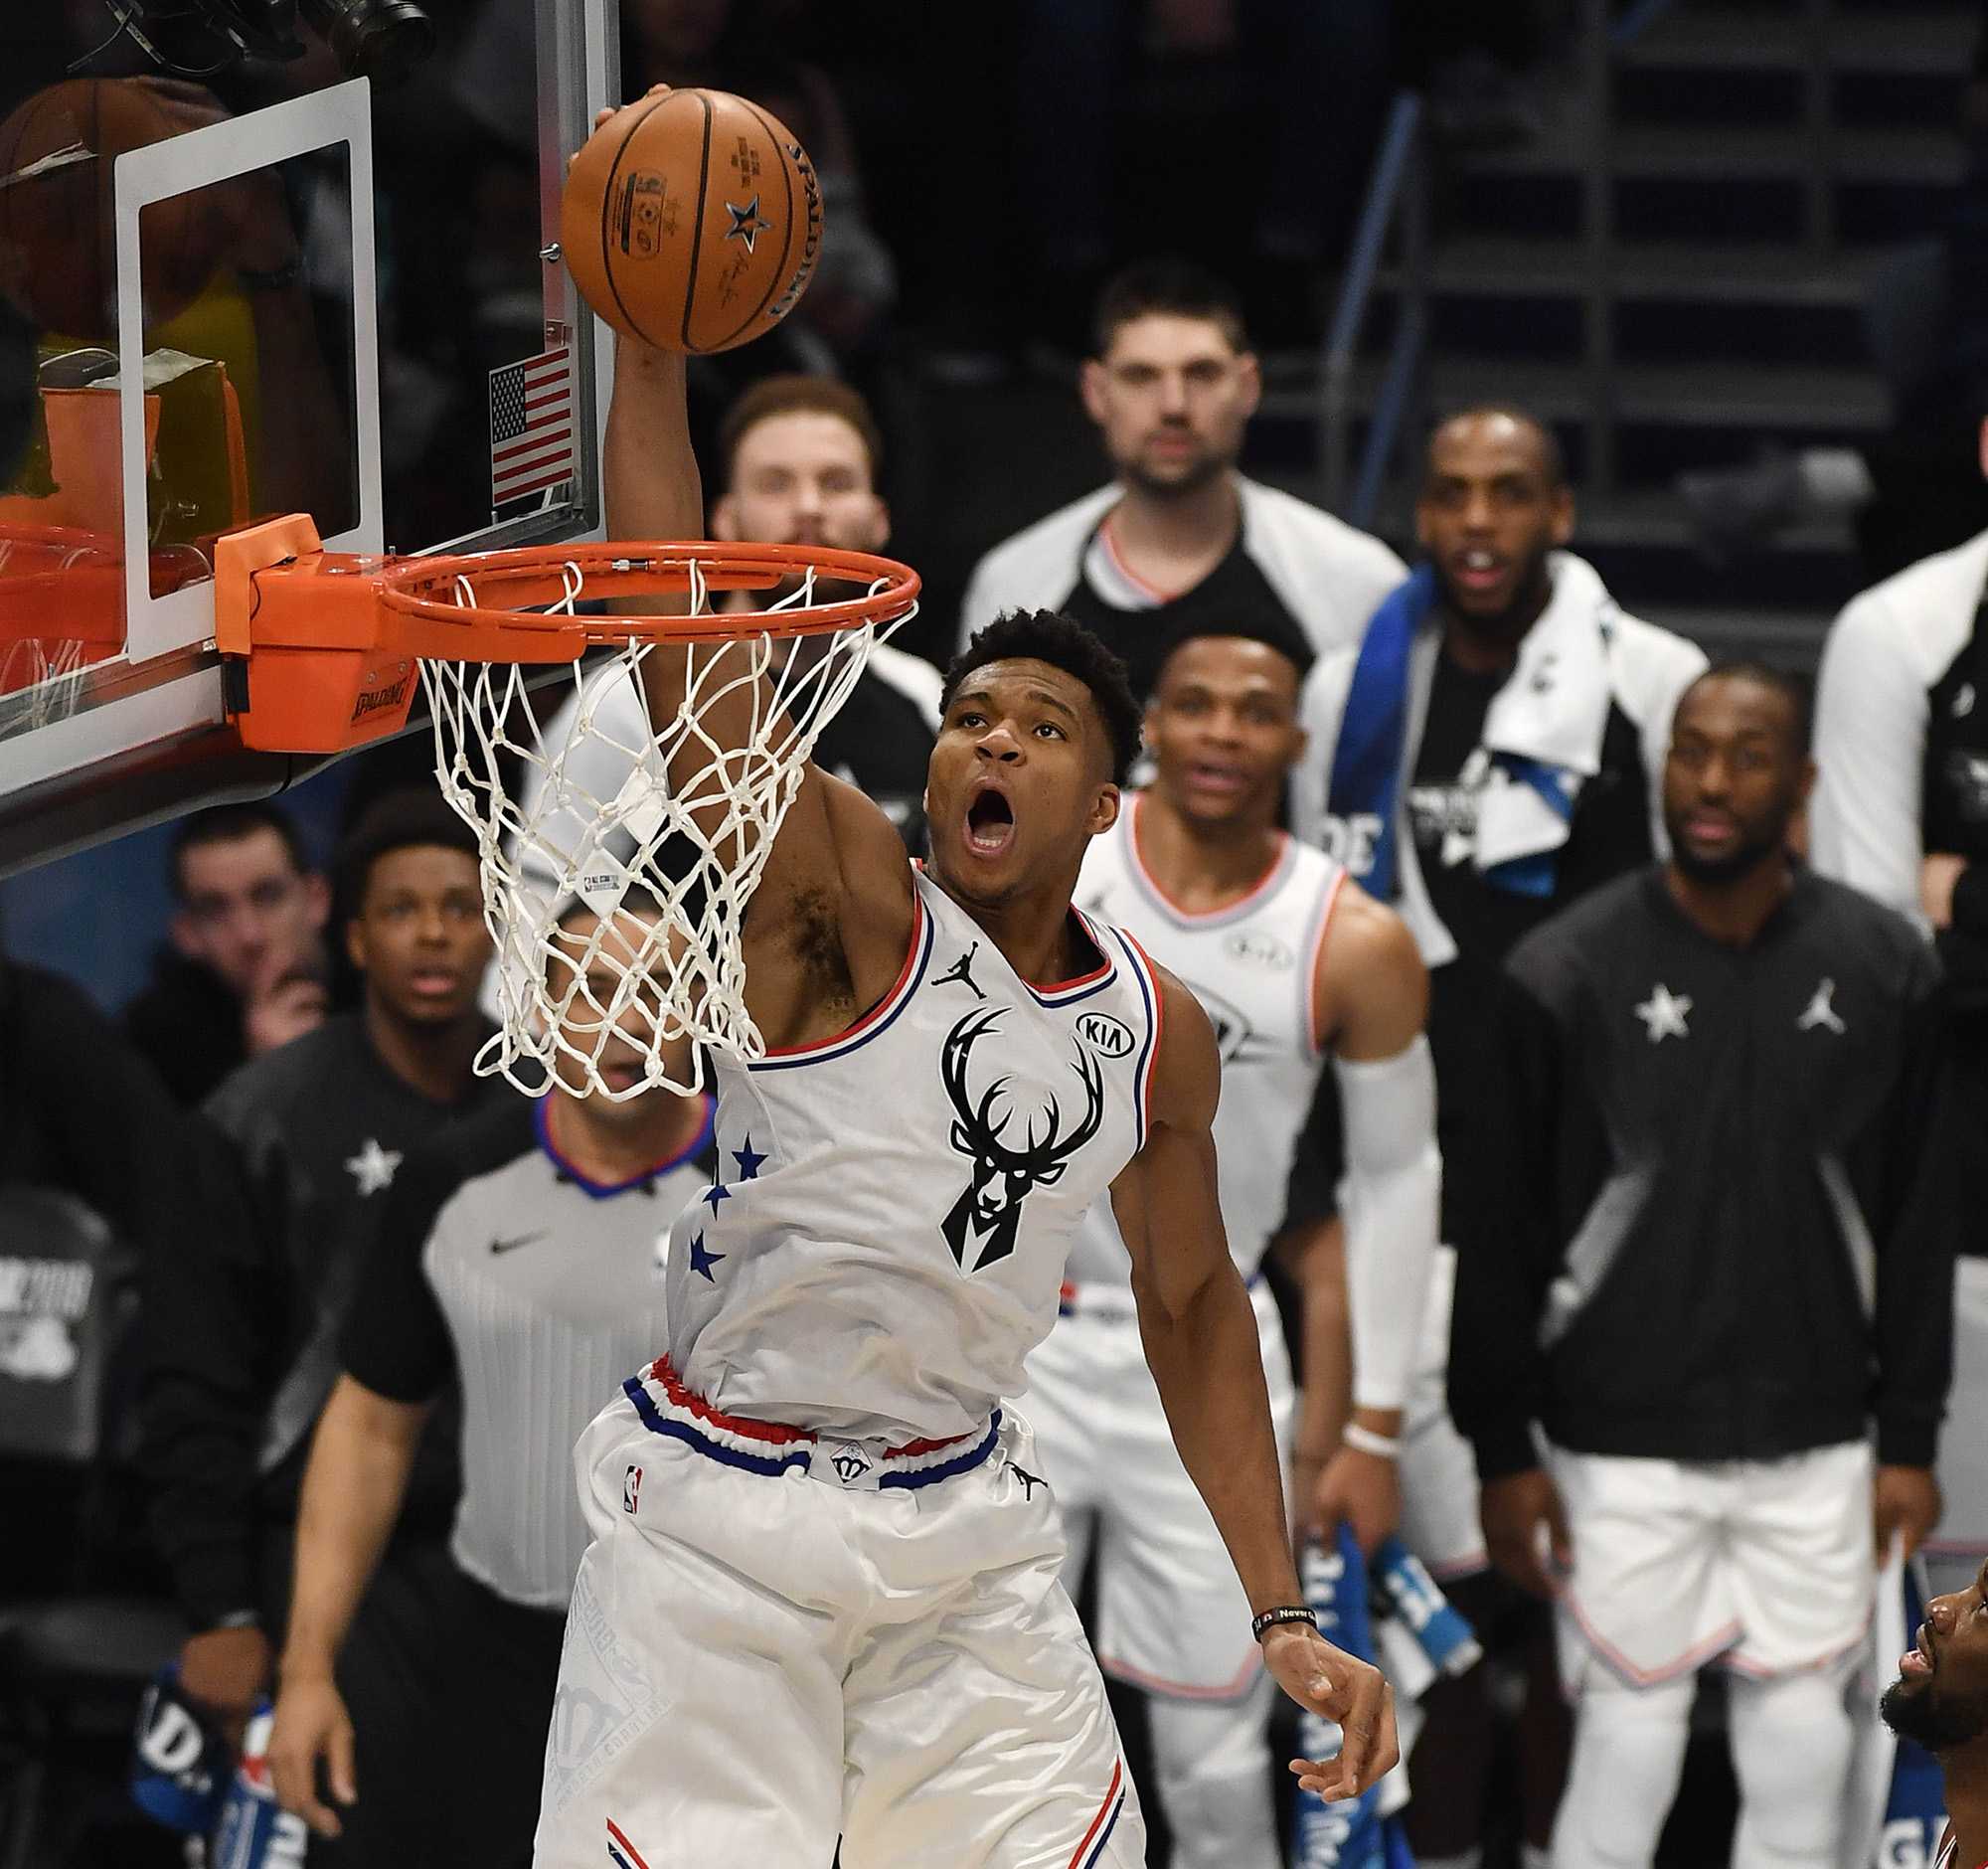 Team Giannis Giannis Antetokounmpo, of the Milwaukee Bucks goes up for a dunk during the first half in the 2019 NBA All-Star 2019 game on Sunday, February 17, 2019 at Spectrum Center in Charlotte, N.C. (David T. Foster III/Charlotte Observer/TNS)